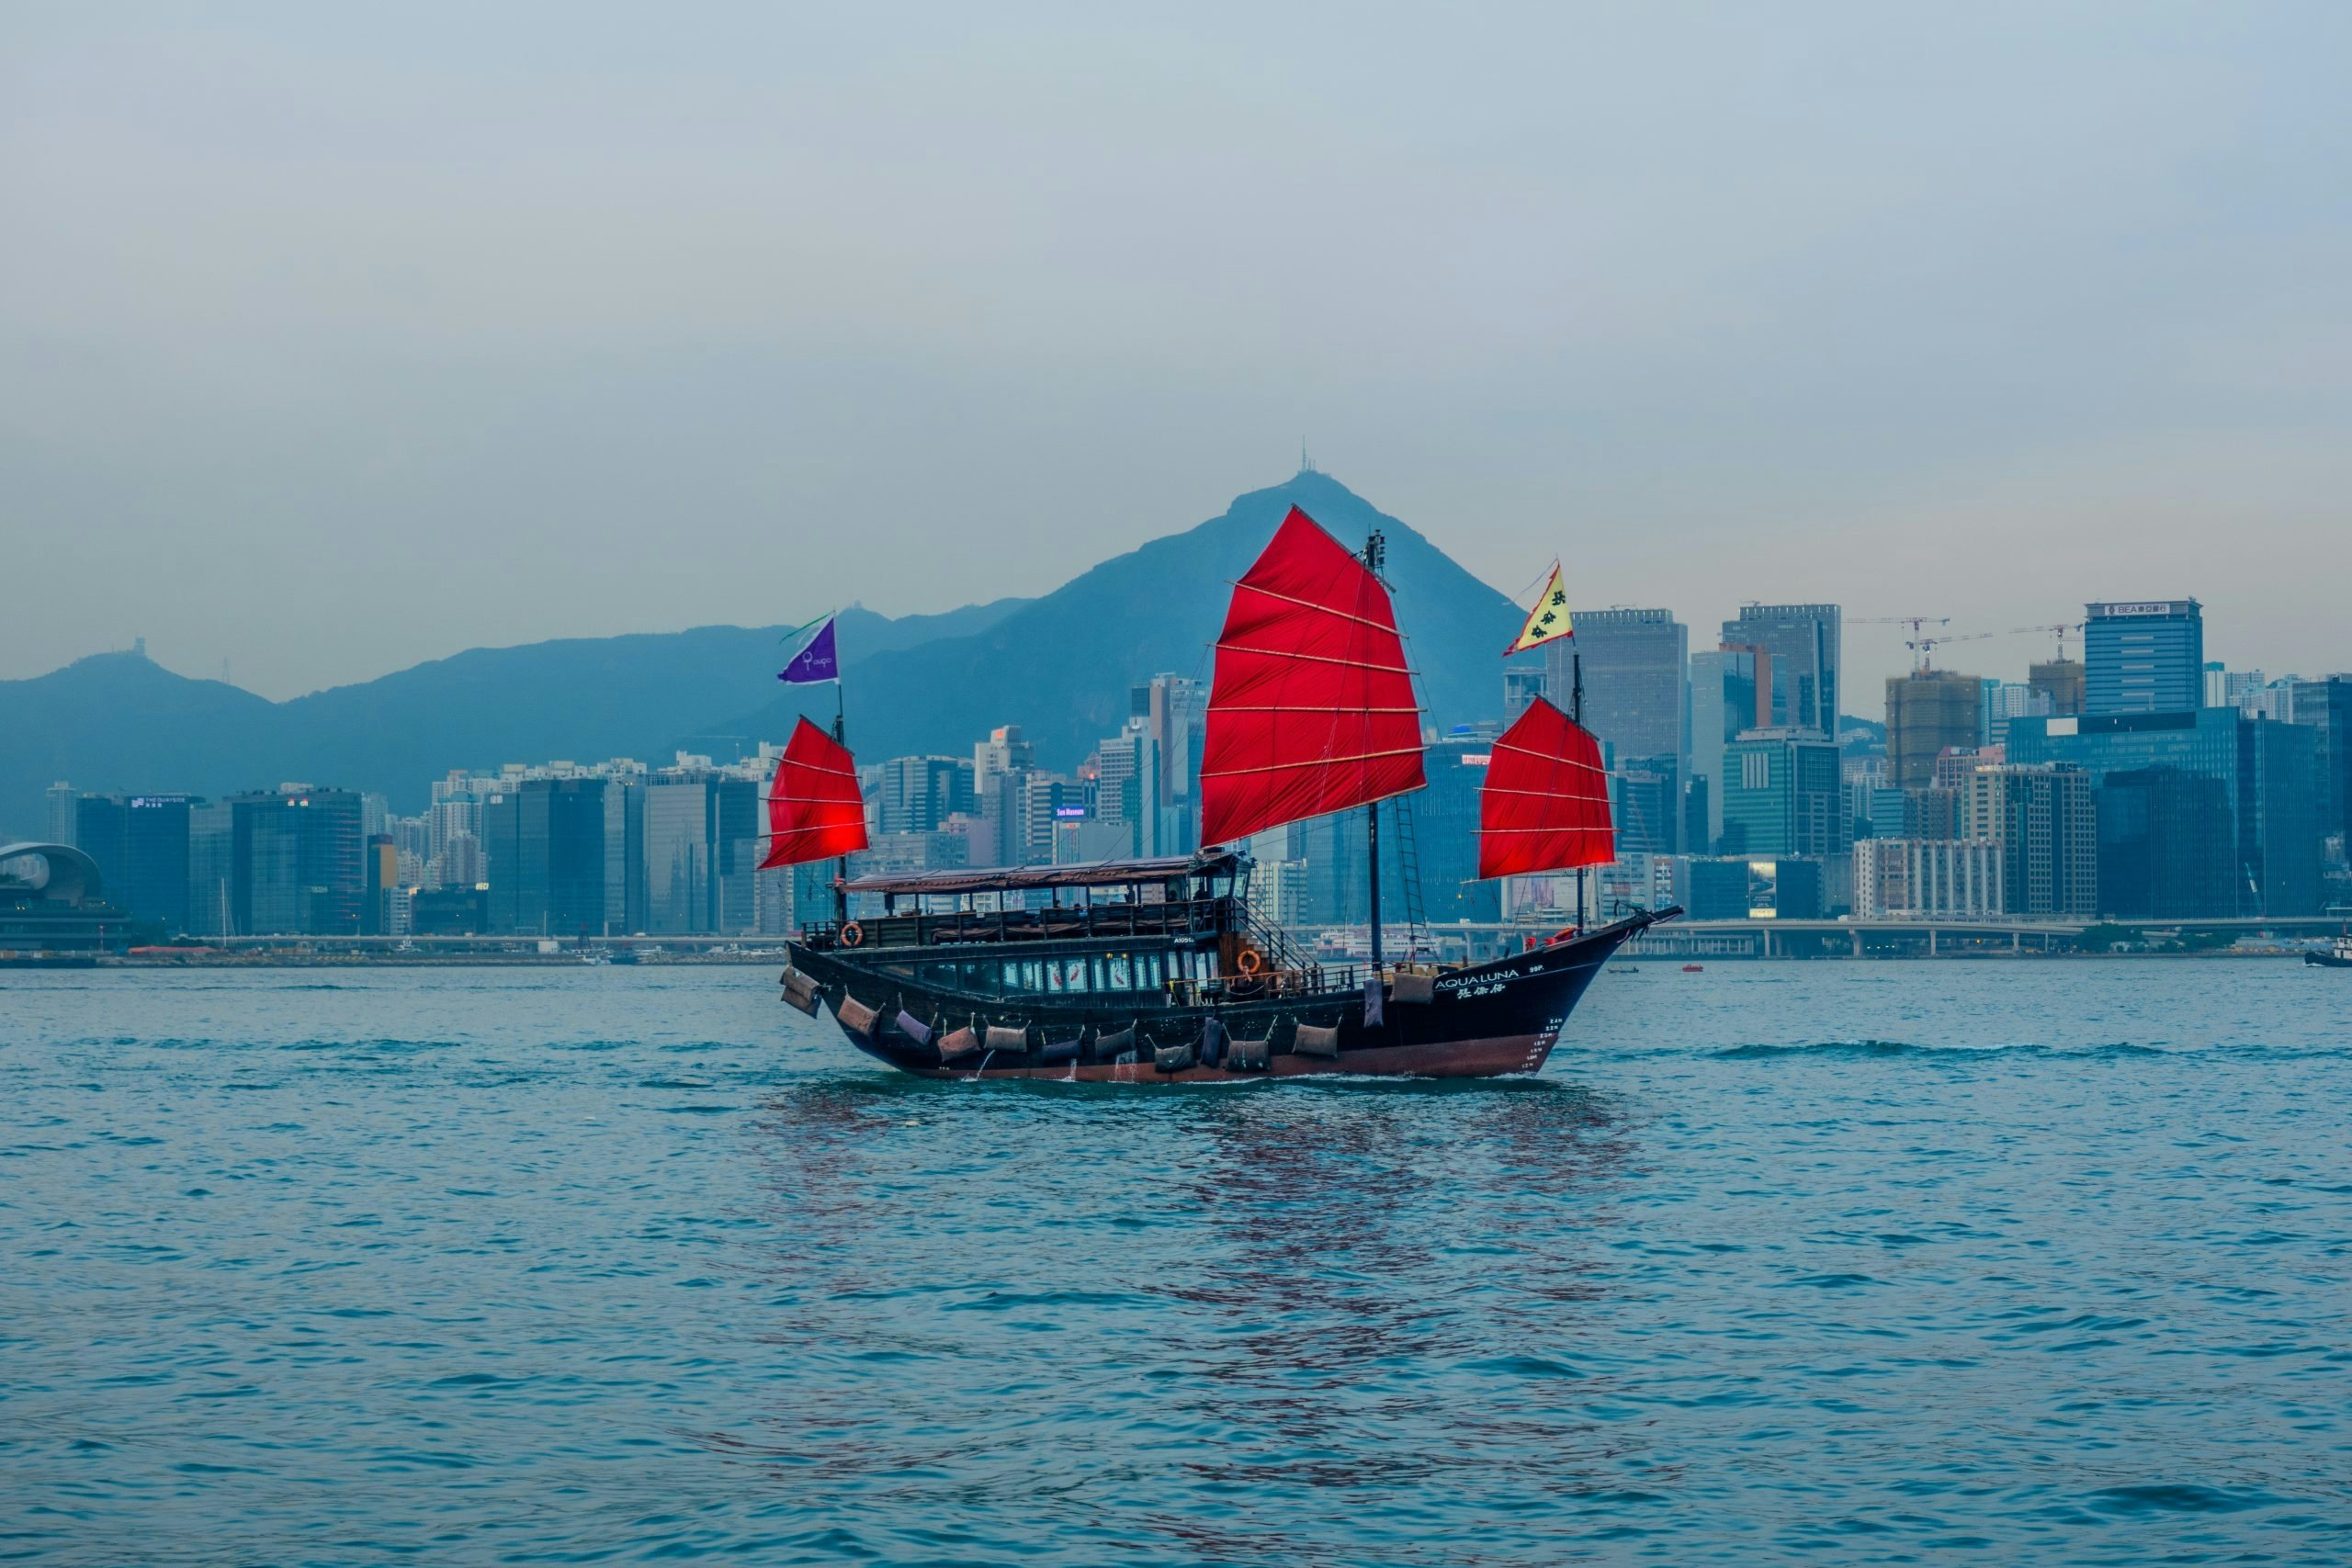 To adapt to a new generation of Chinese tourists, Hong Kong is reshaping its retail and hospitality sectors with a focus on experiential offerings. Photo: Unsplash